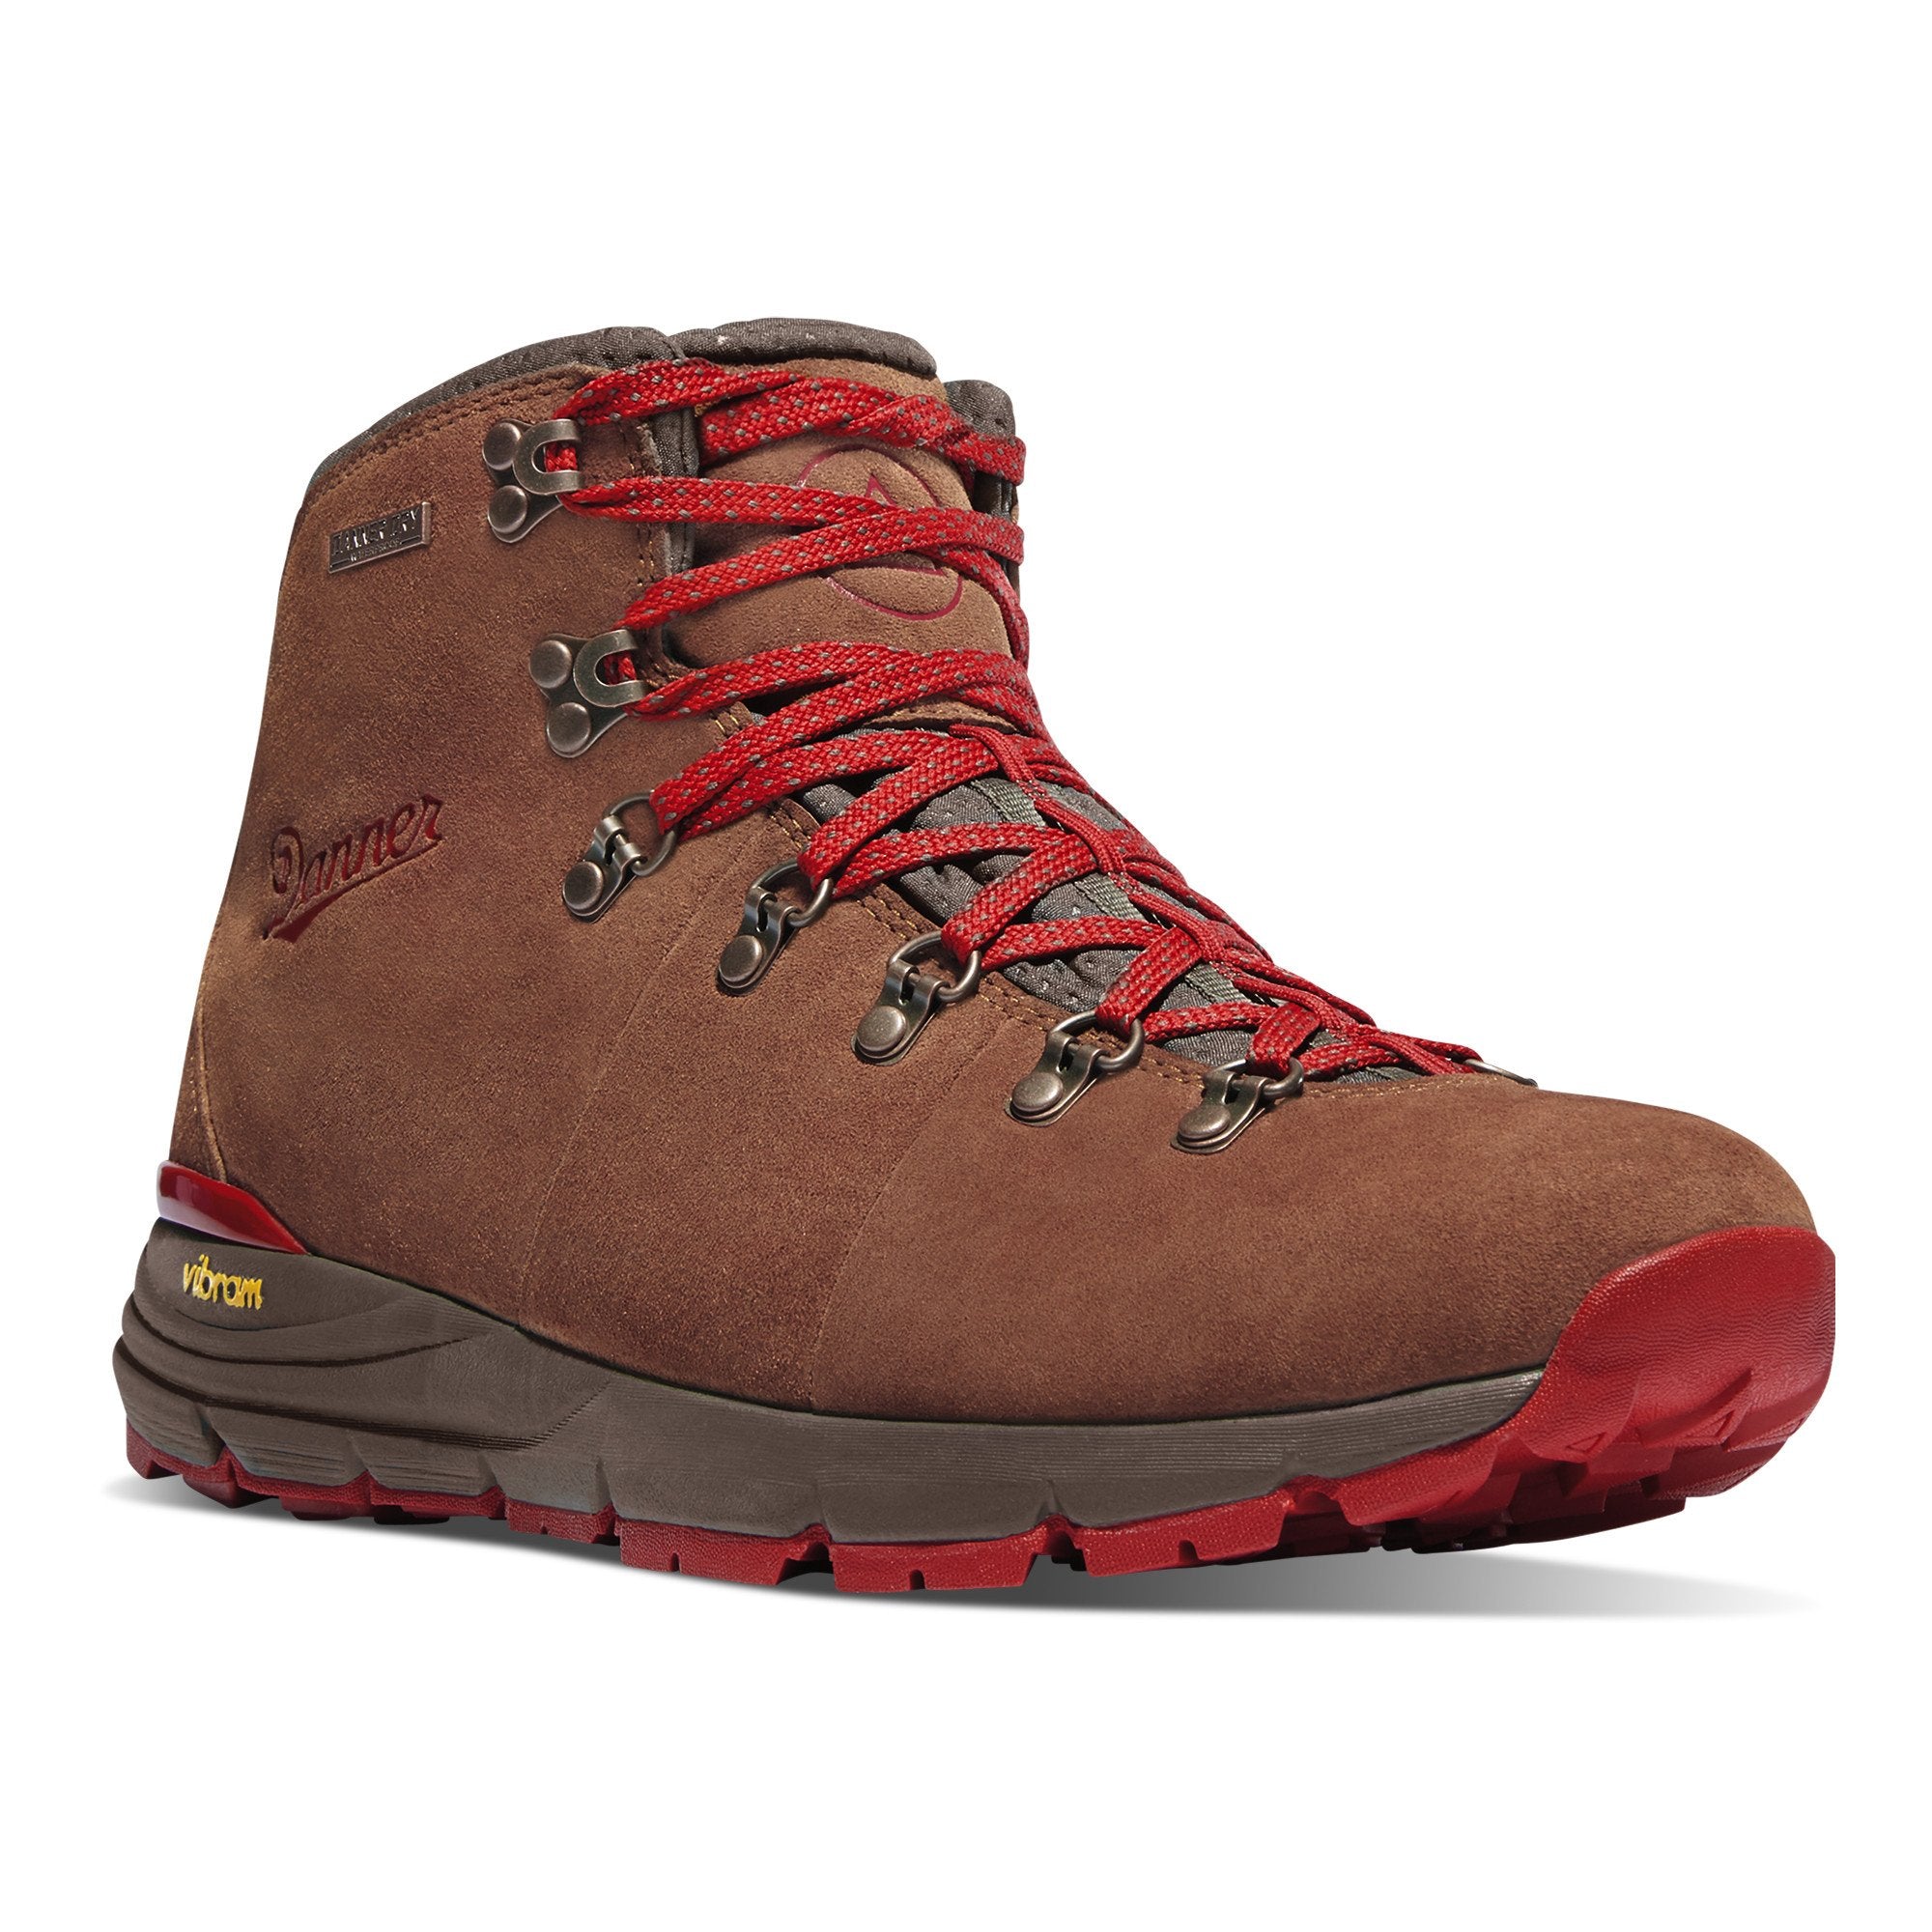 Danner Men's Mountain 600 4.5" Waterproof Hiking Boot in Brown/Red from the side